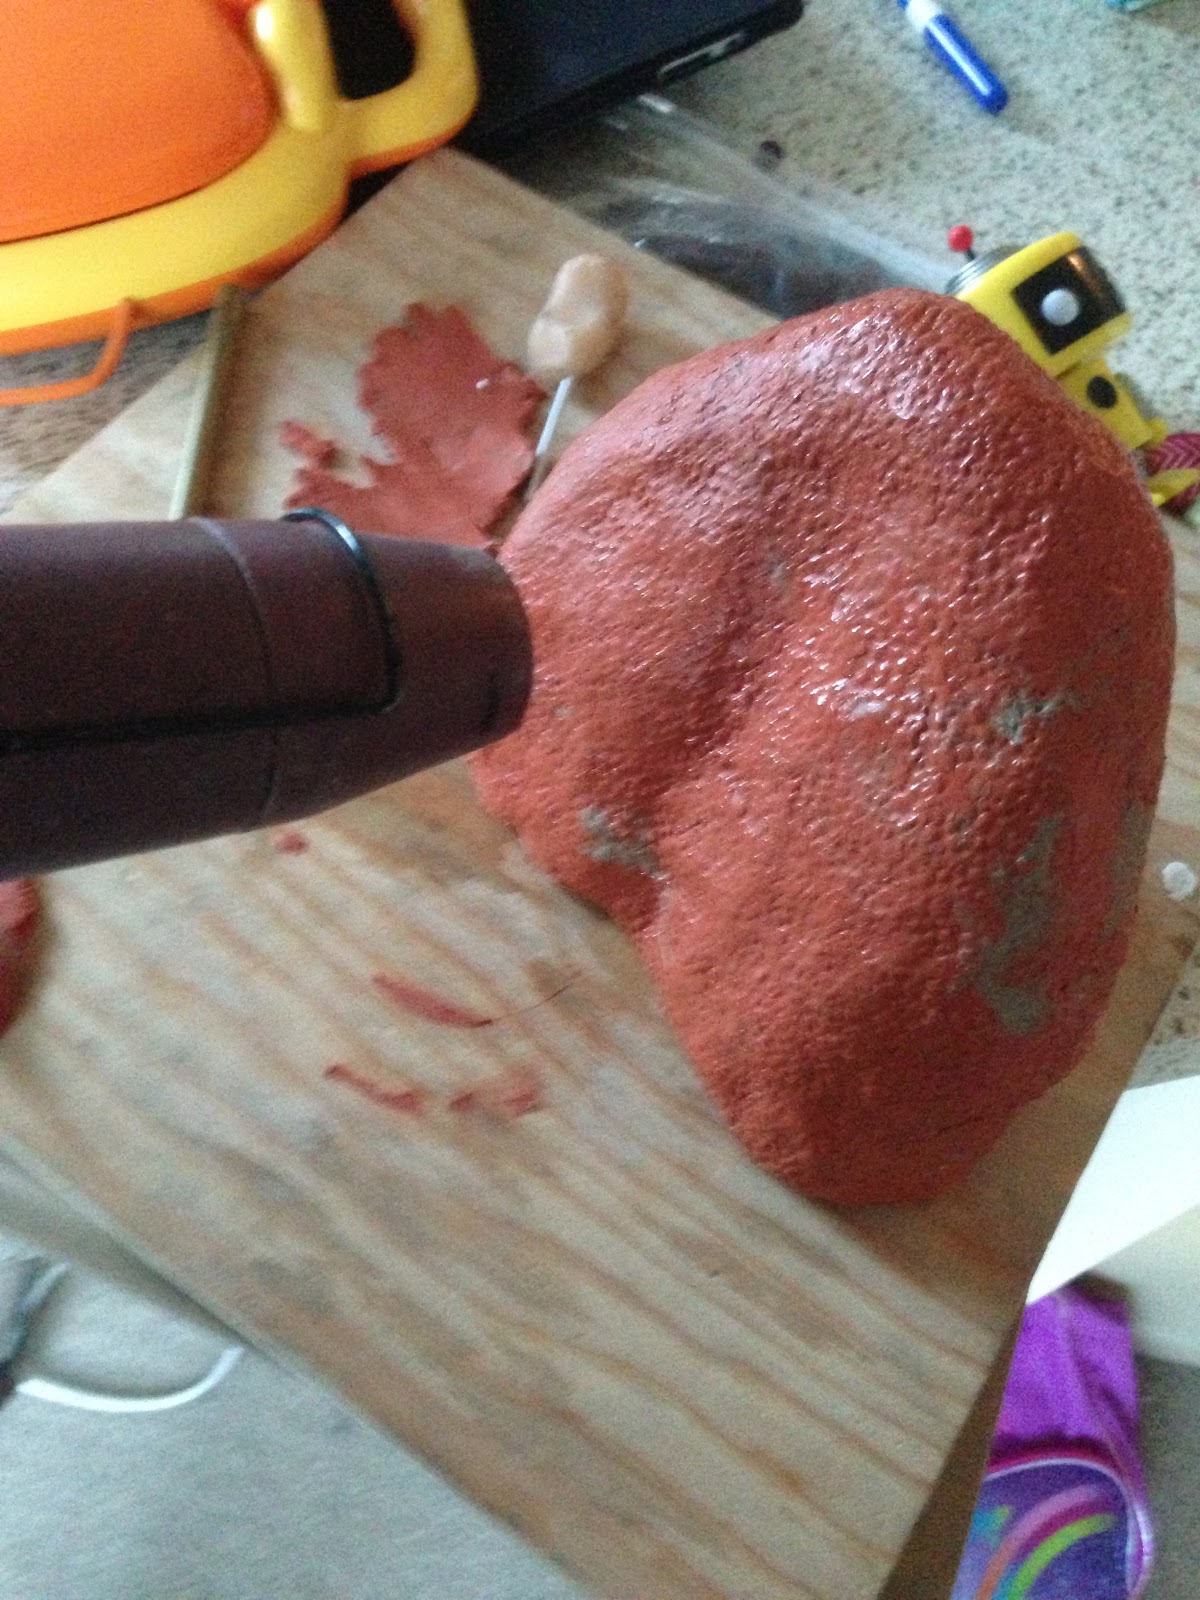 How to make a dildo out of clay